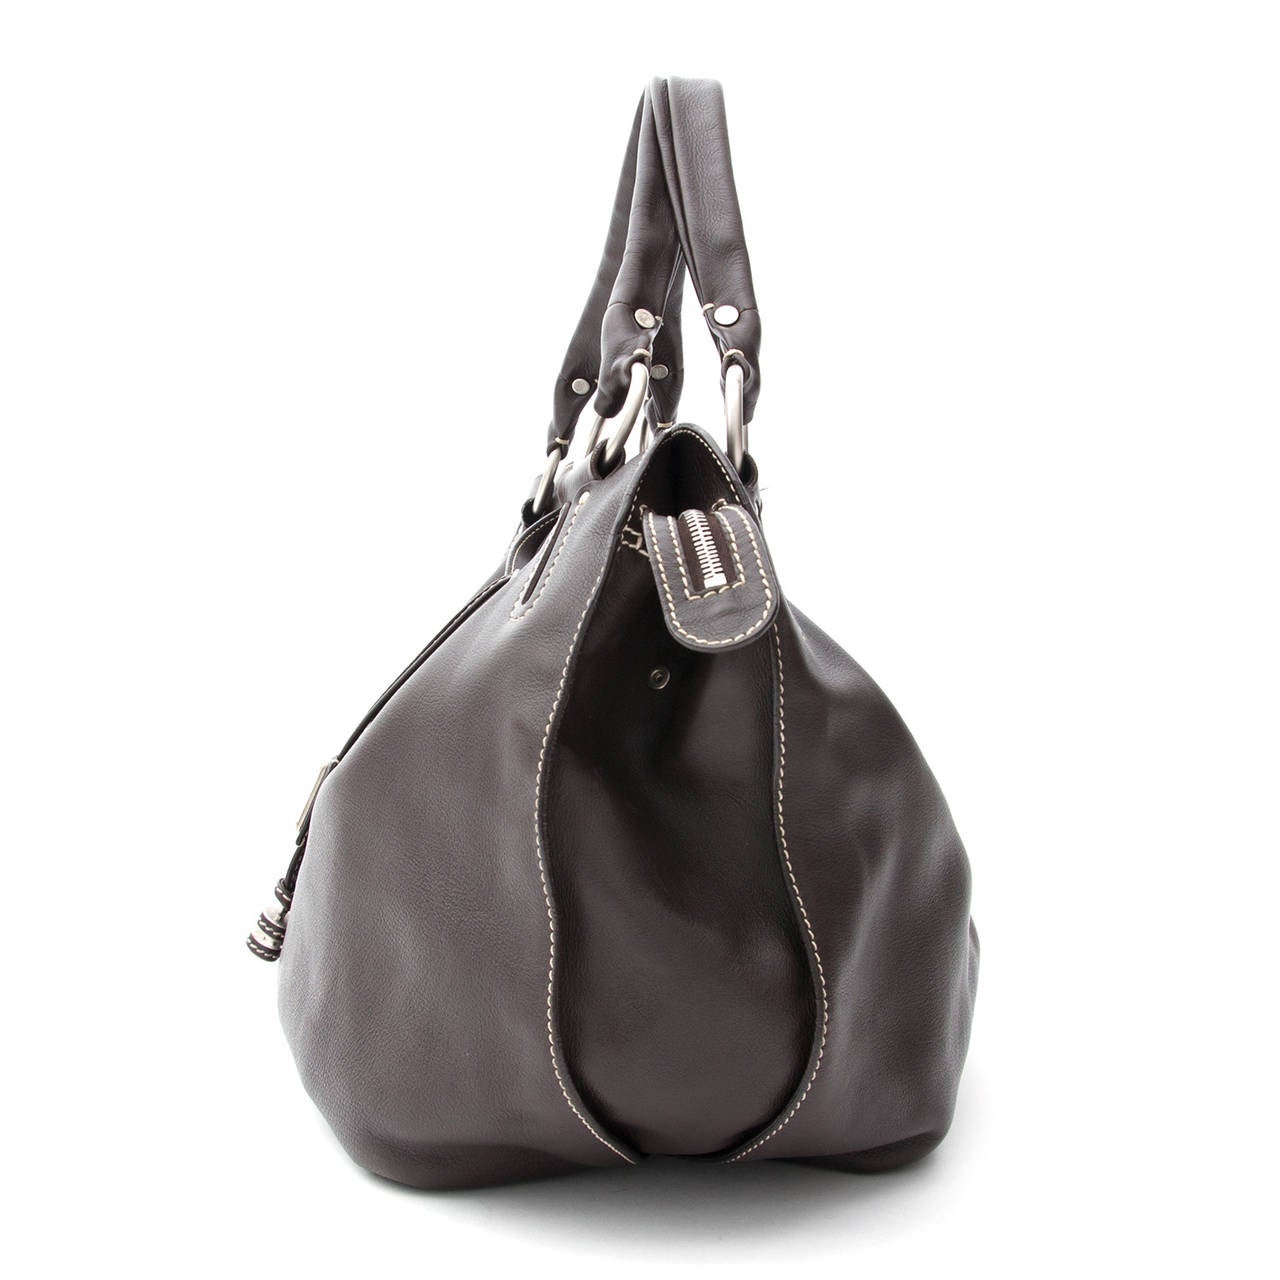 A divine dark brown leather bag with sleek detailing. This Bag is made of beautifully soft & smooth dark brown leather with silver tone hardware, ringed shoulder straps & contrasting off-white stitching throughout the bag. Features a zip closure & a